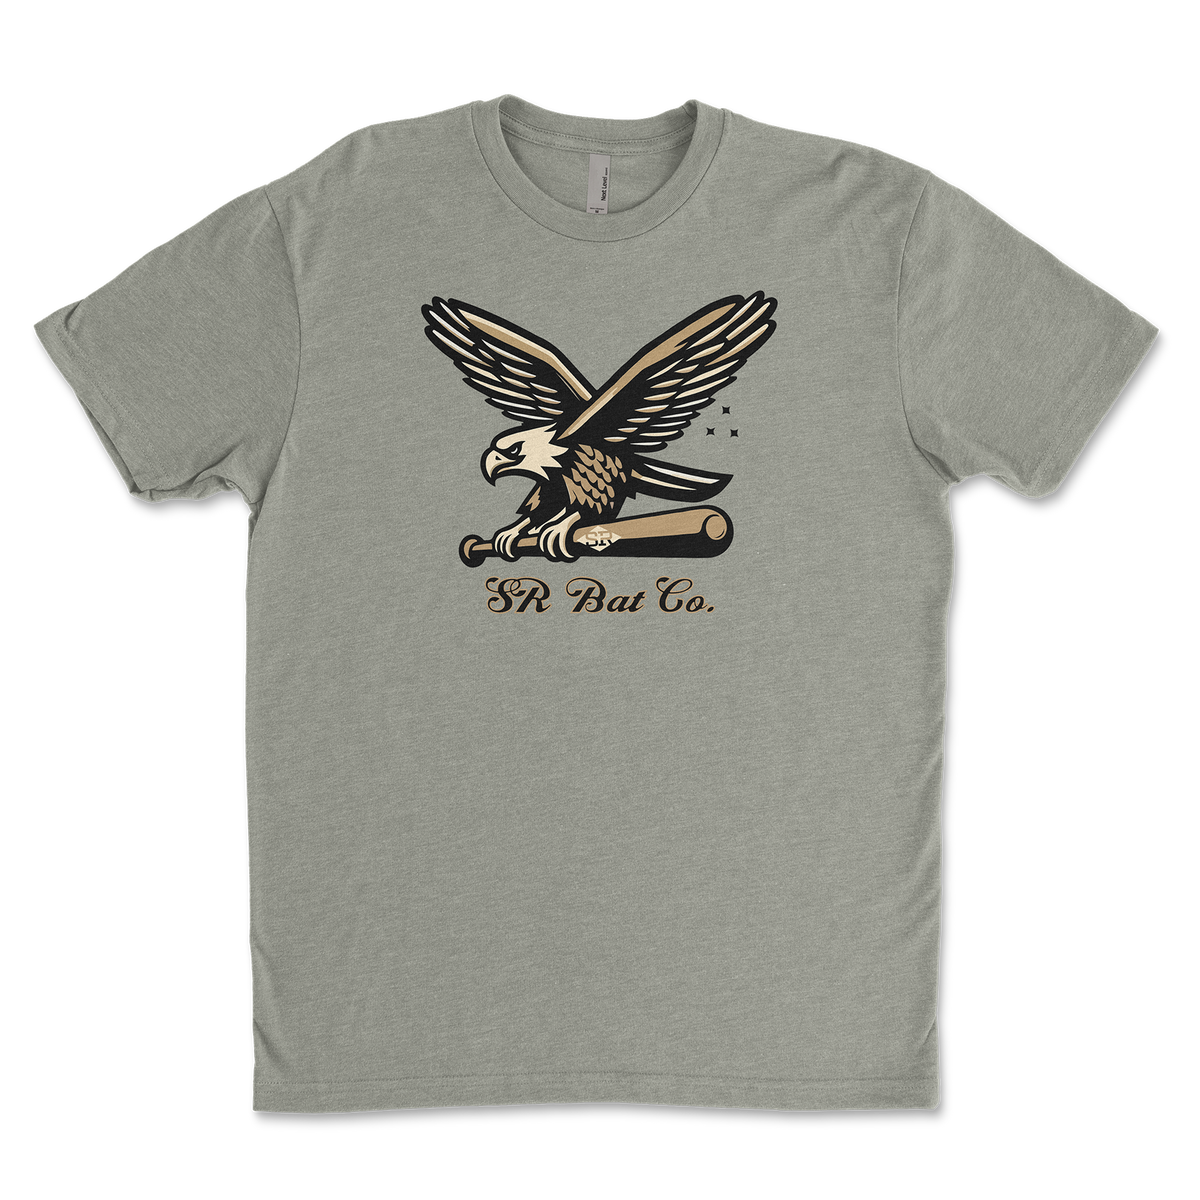 The Eagle Has Landed Tee